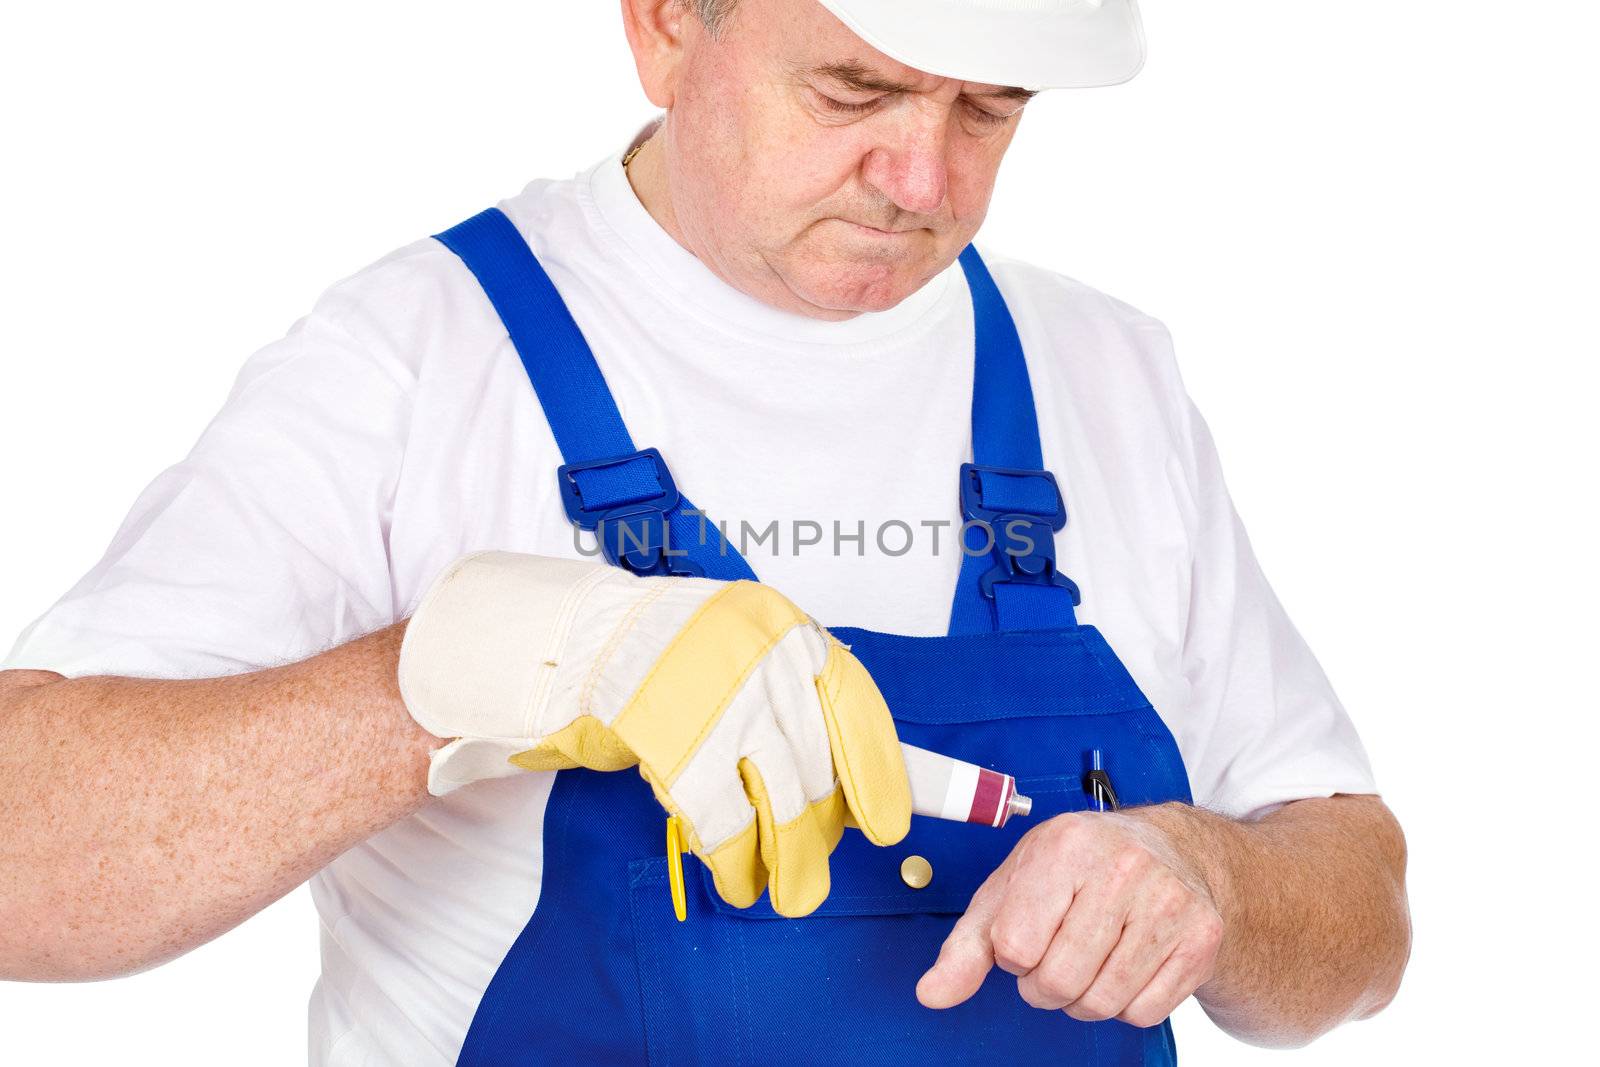 Middle age worker putting cream on his wound, isolated on white background